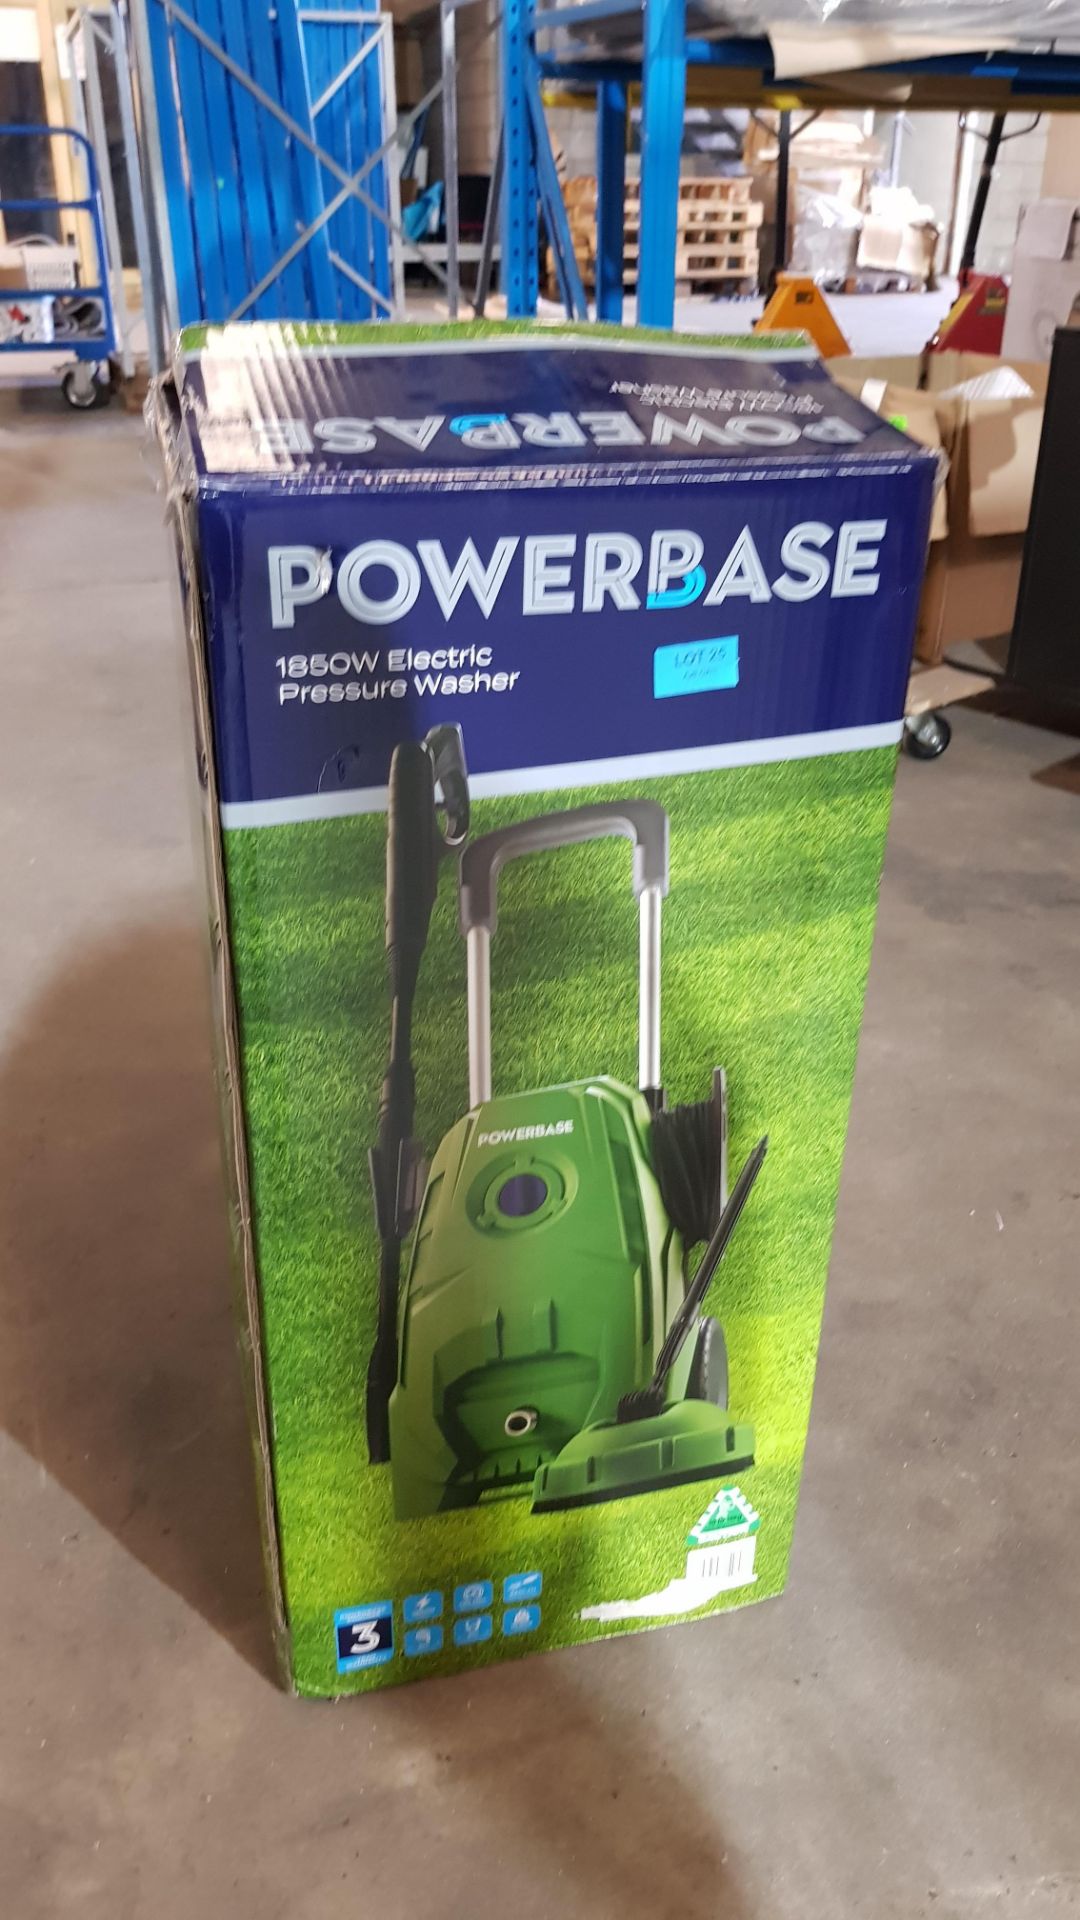 (2A) RRP £120. Powerbase 1850W Electric Pressure Washer. - Image 6 of 6